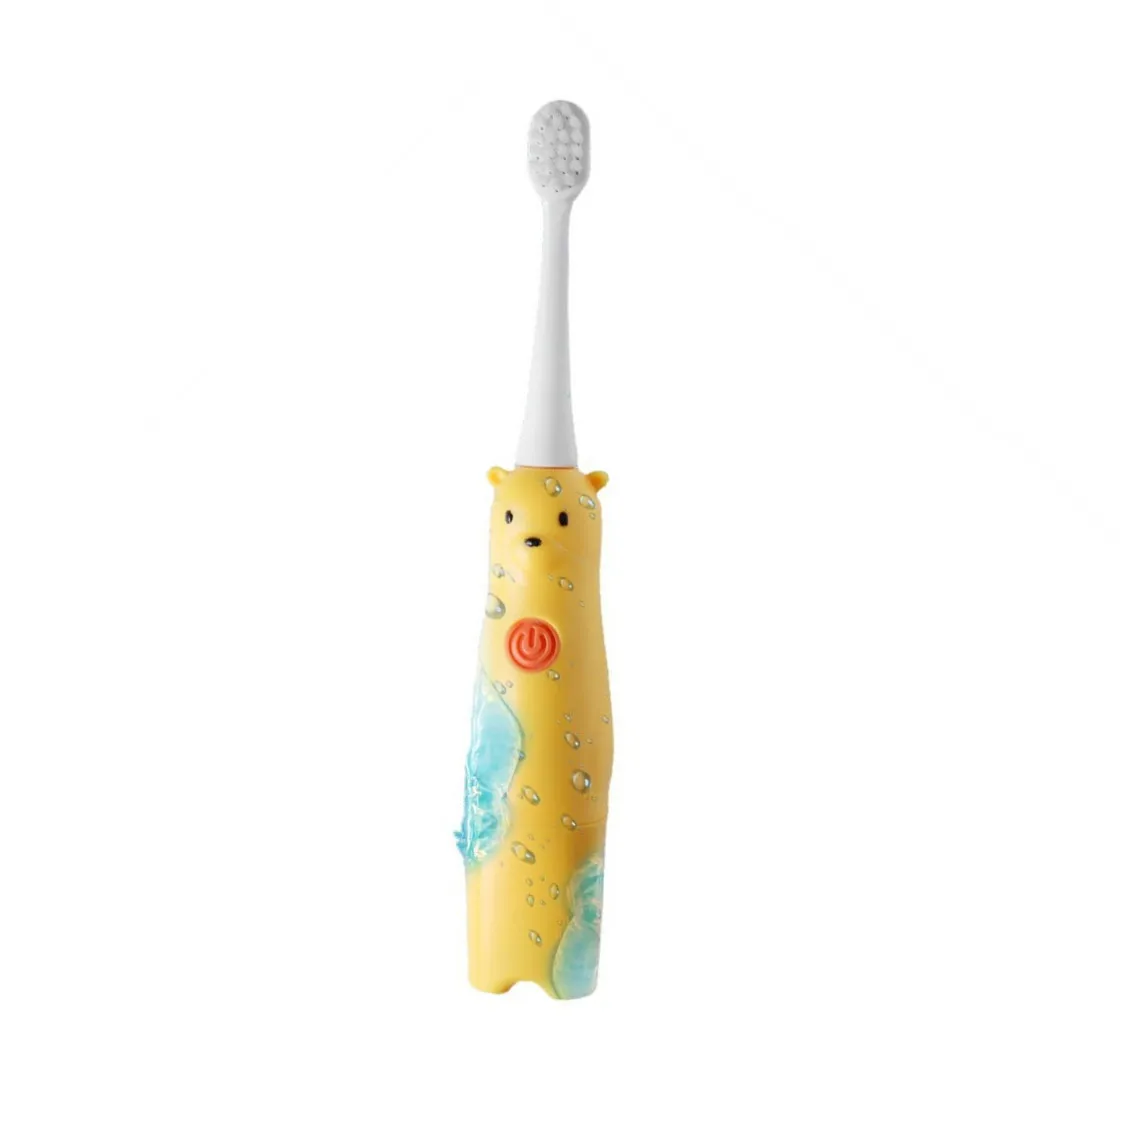 

Electric children's toothbrush baby new cartoon soft hair oral cleaning whitening ultrasonic automatic toothbrush, As shown